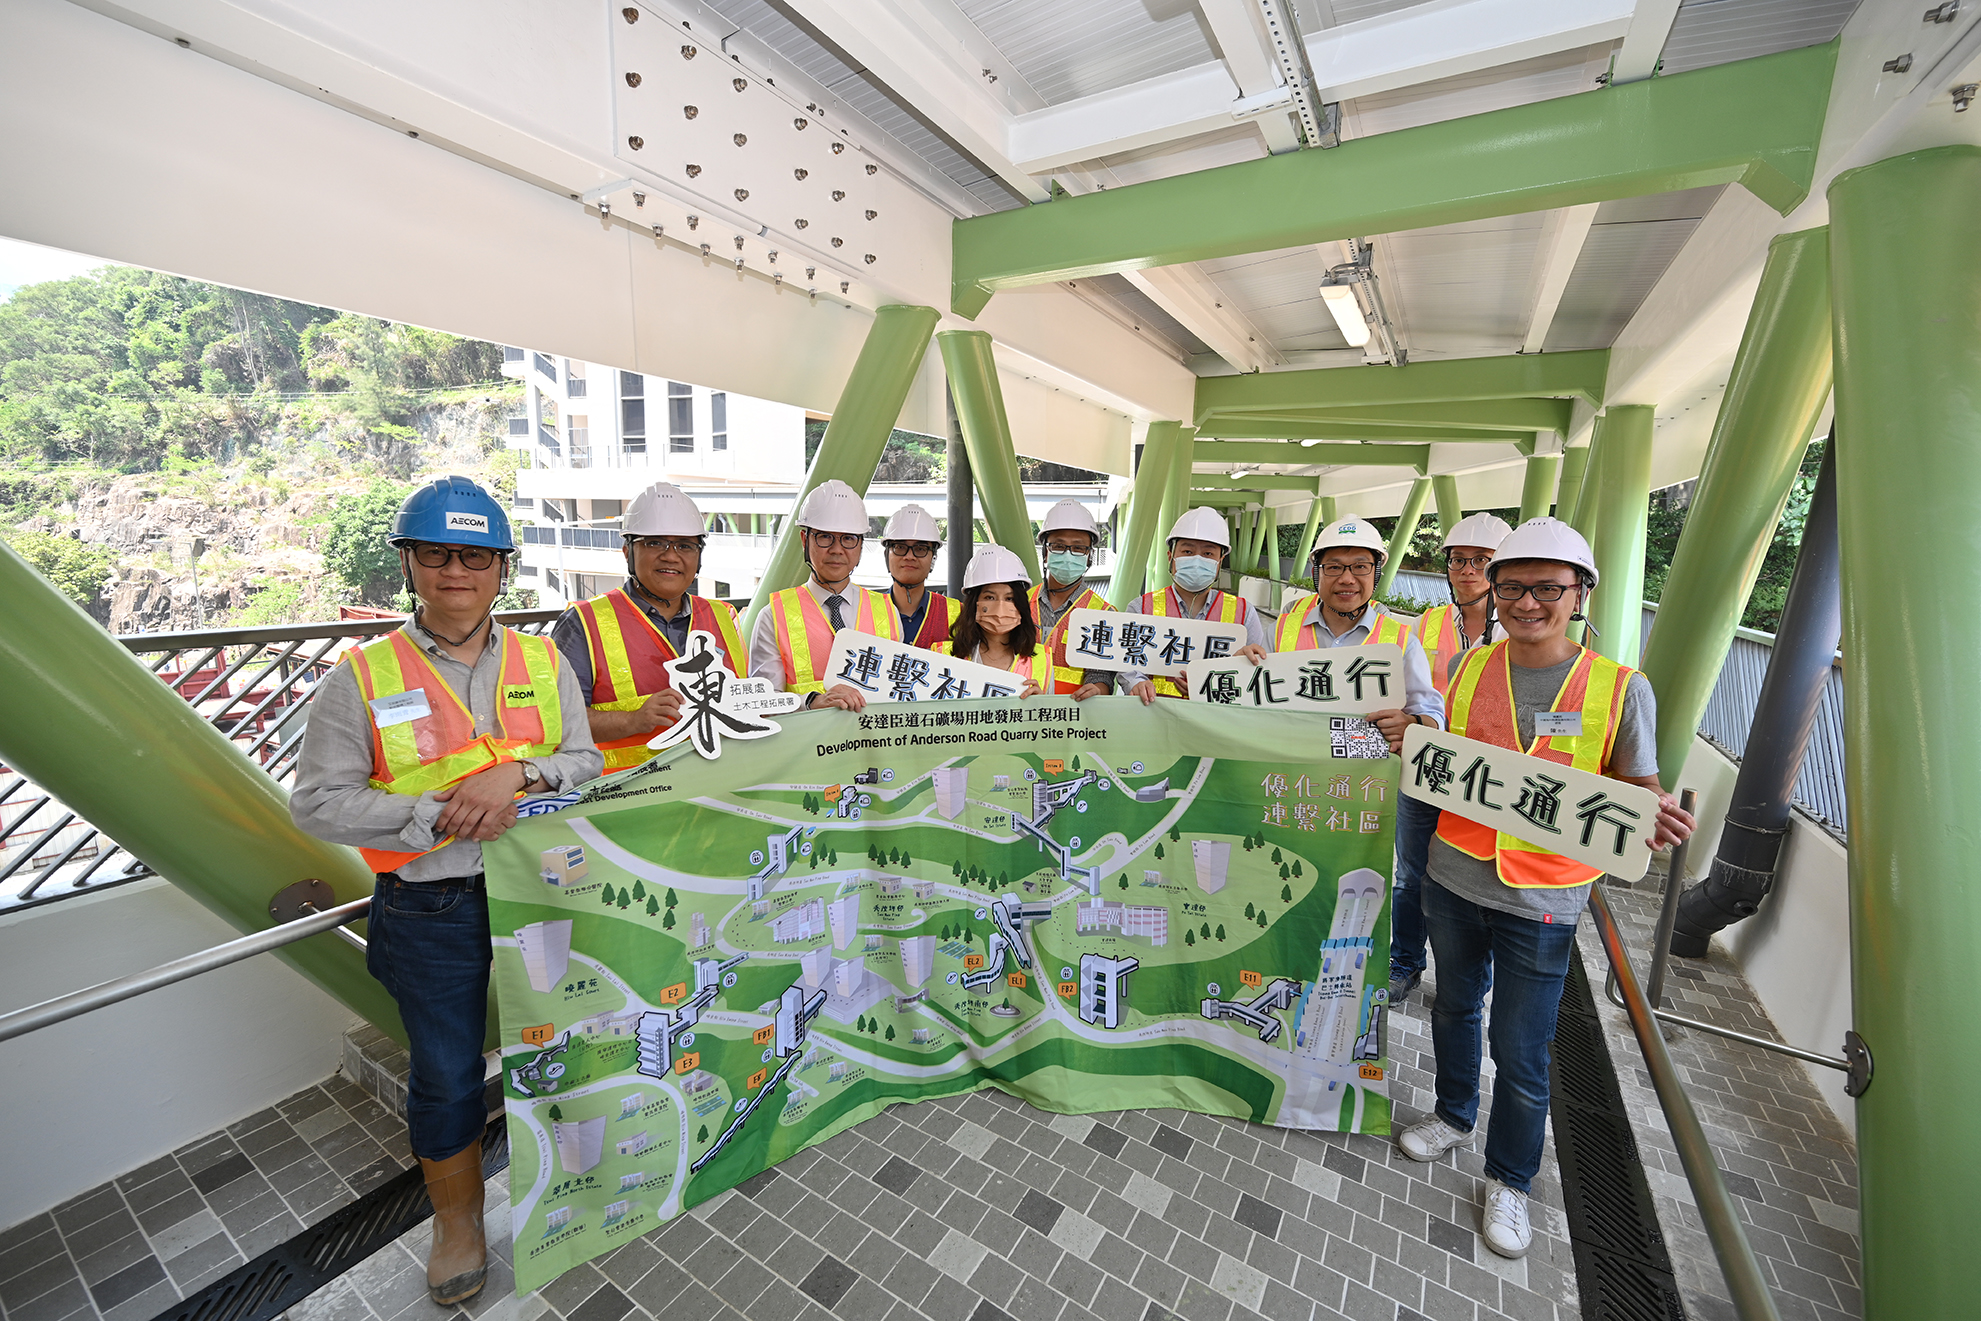 School representatives had a site visit to the PCF linking Hiu Kwong Street with Hiu Ming Street.